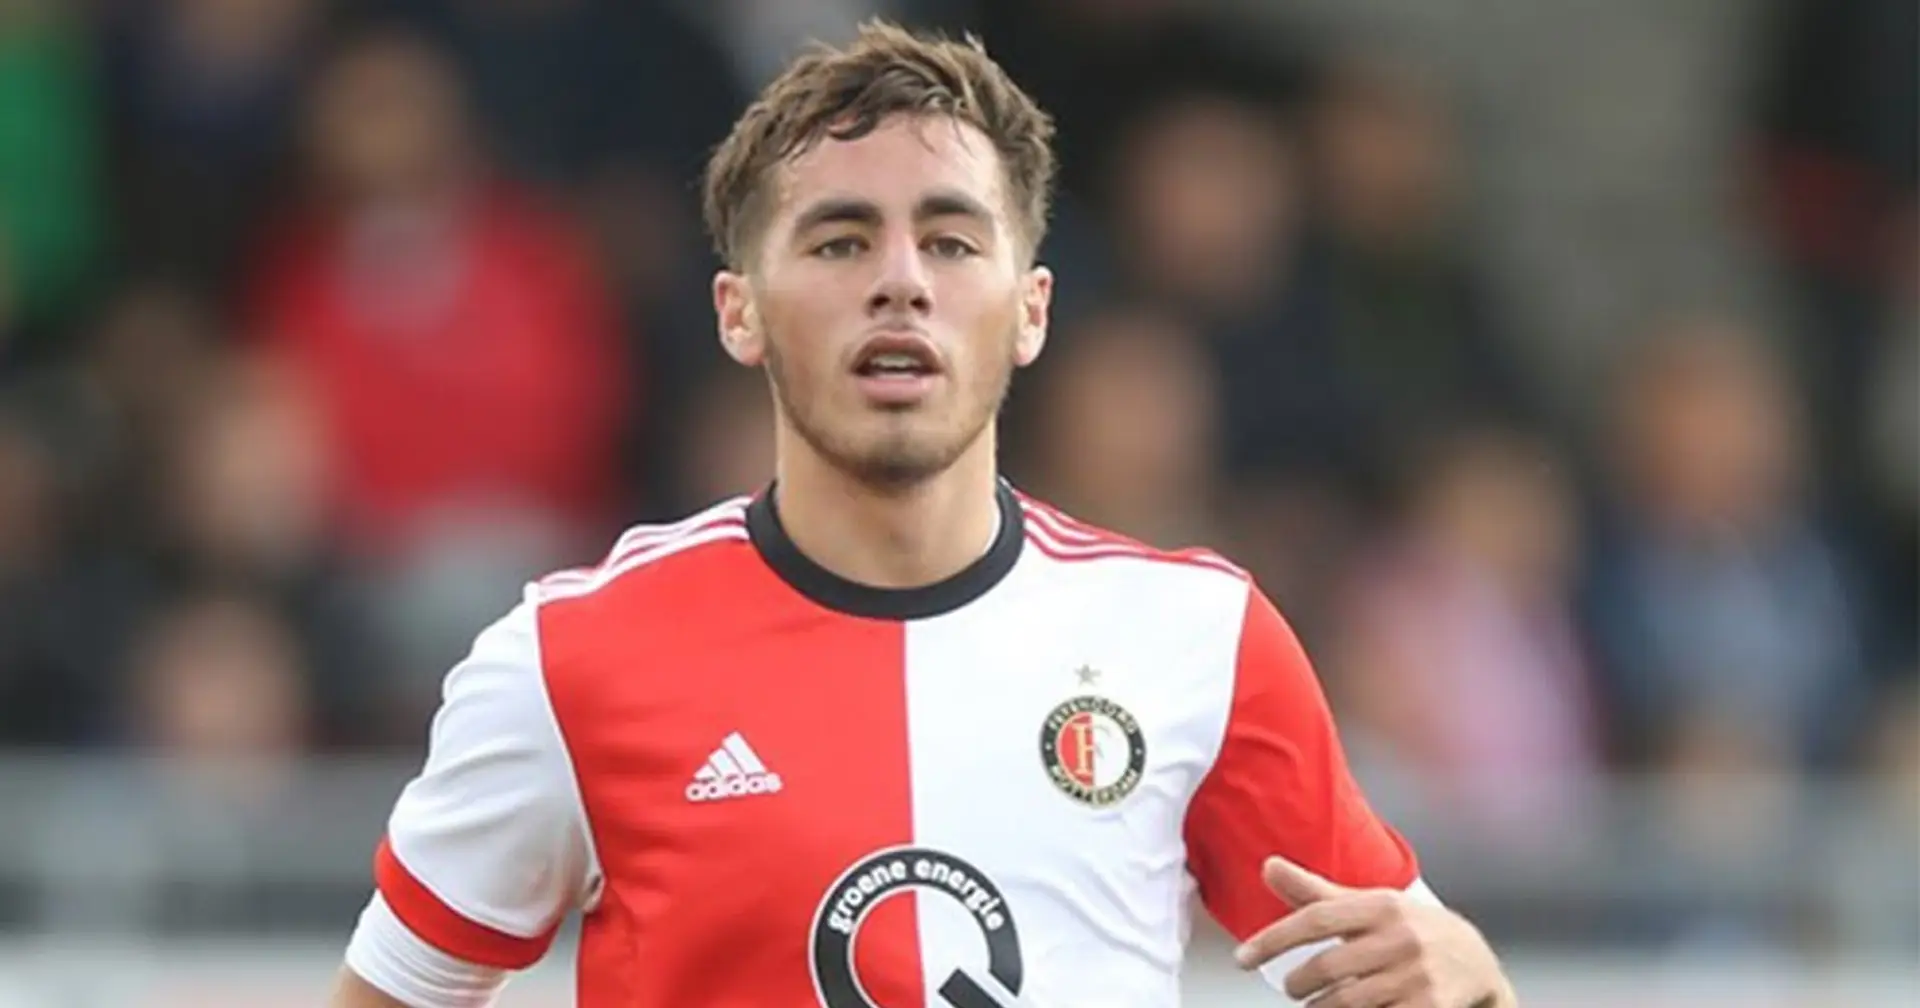 'It’s no secret that Arsenal has already spoken to Kokcu’s agents': Dutch football journalist opens up on competition for Feyenoord's central midfielder